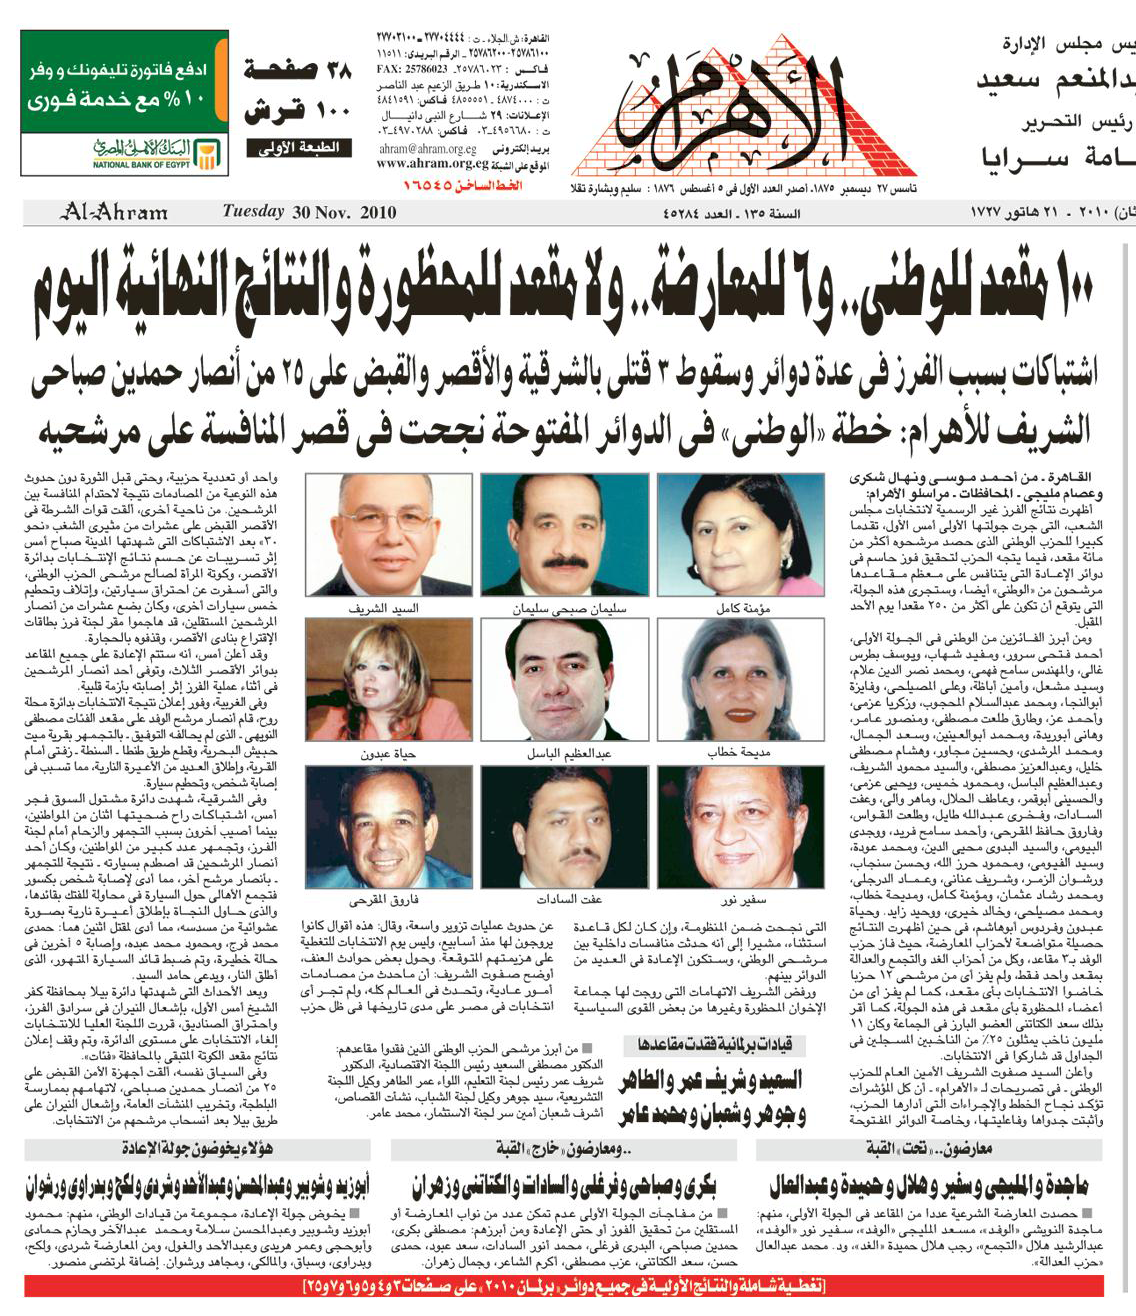 Results of November 28 Parliamentary elections as reported on the front page of the Egyptian daily Al-Ahram, November 30, 2010.